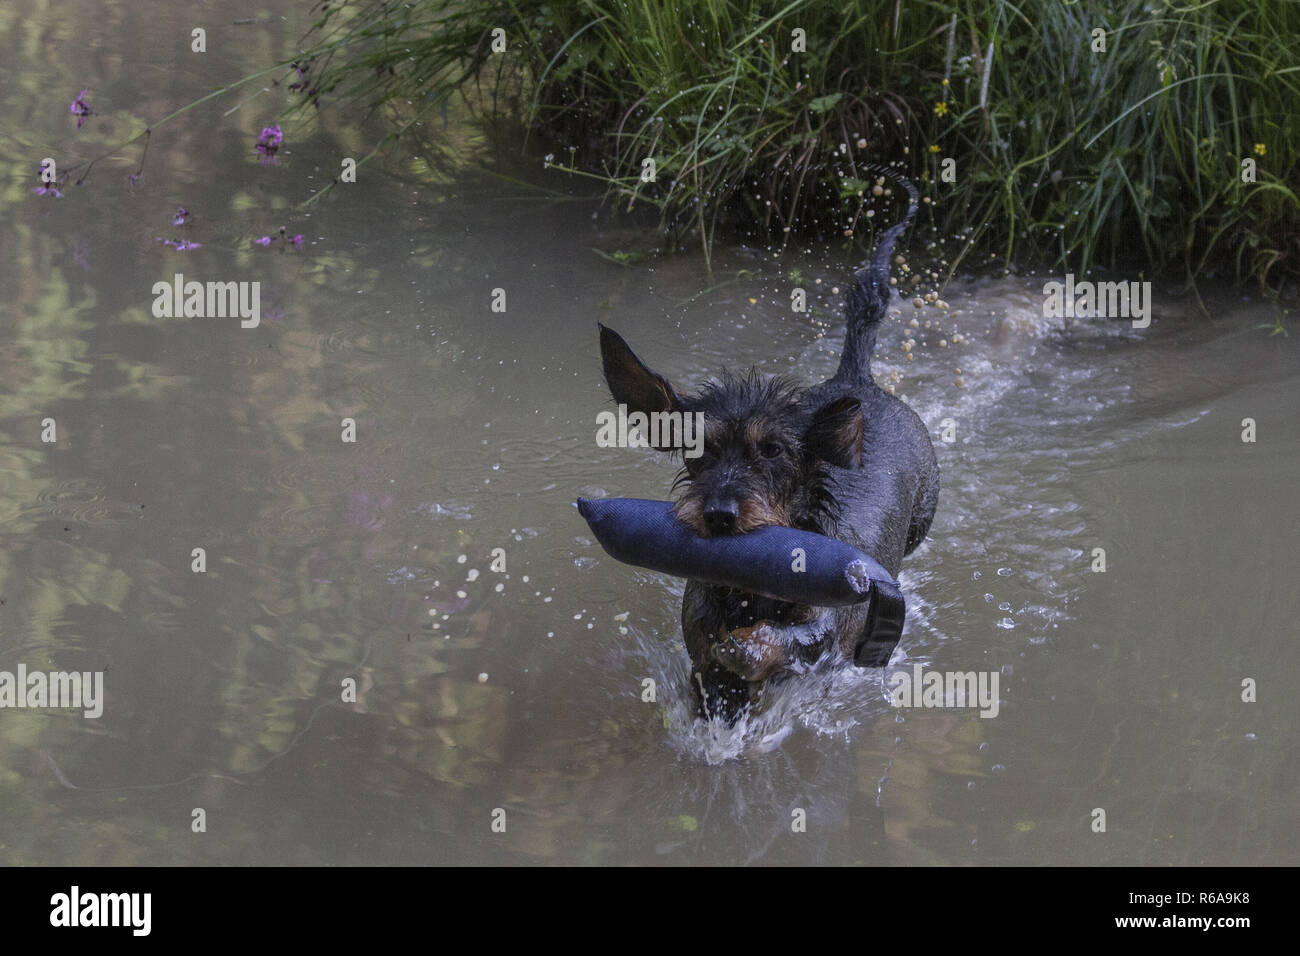 Enthusiastic Rough-Haired Dachshund In The Water Work Stock Photo